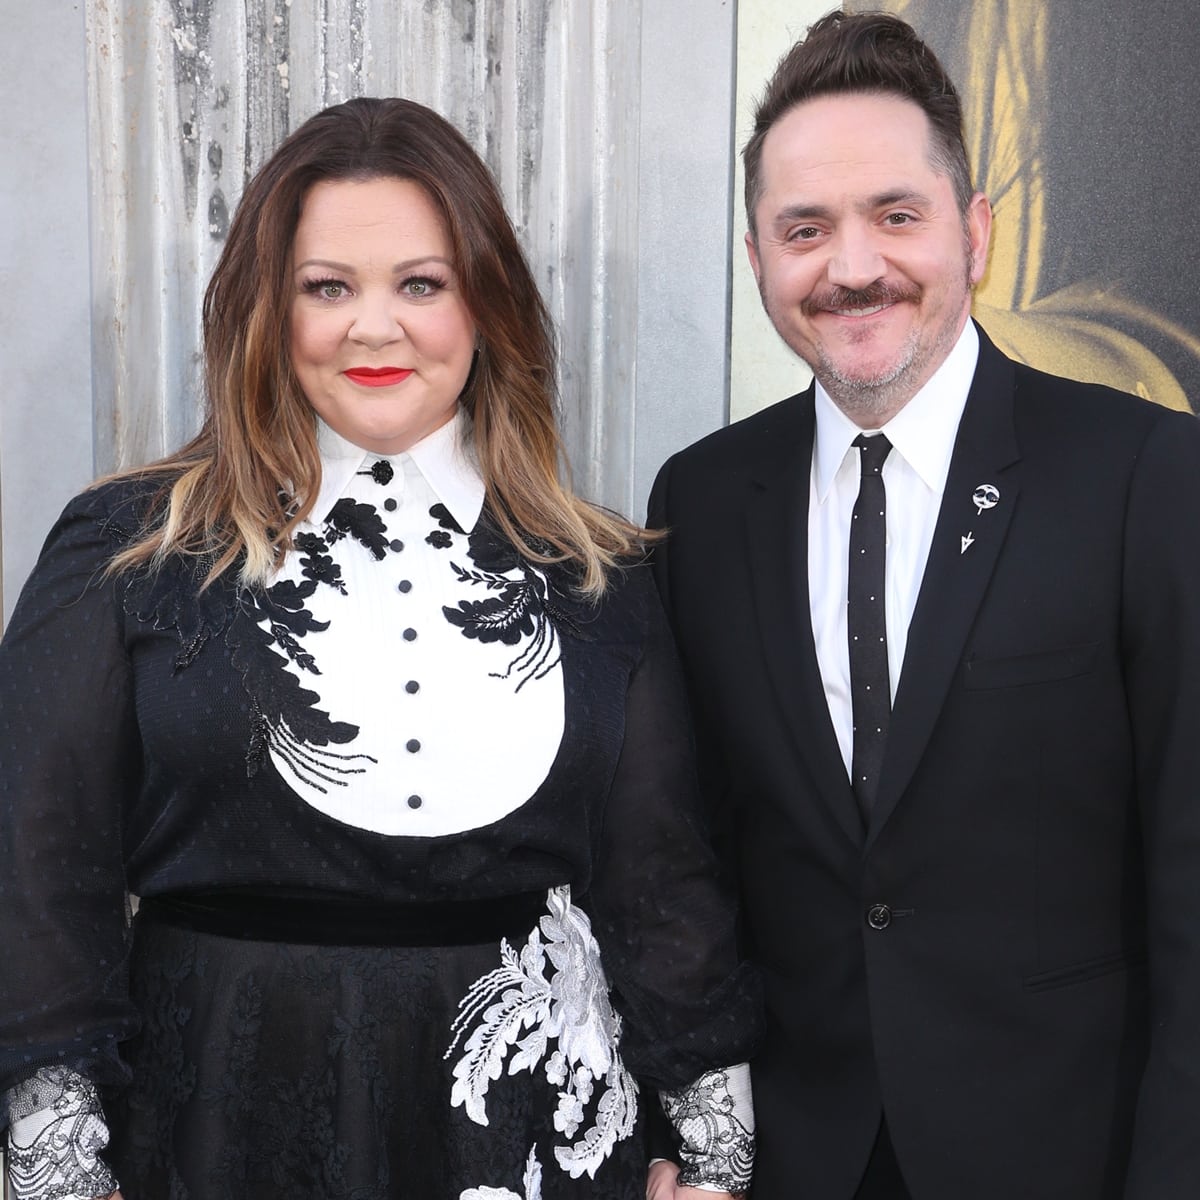 Melissa McCarthy met her future husband Ben Falcone at The Groundlings, an improvisation and sketch comedy theatre in Los Angeles